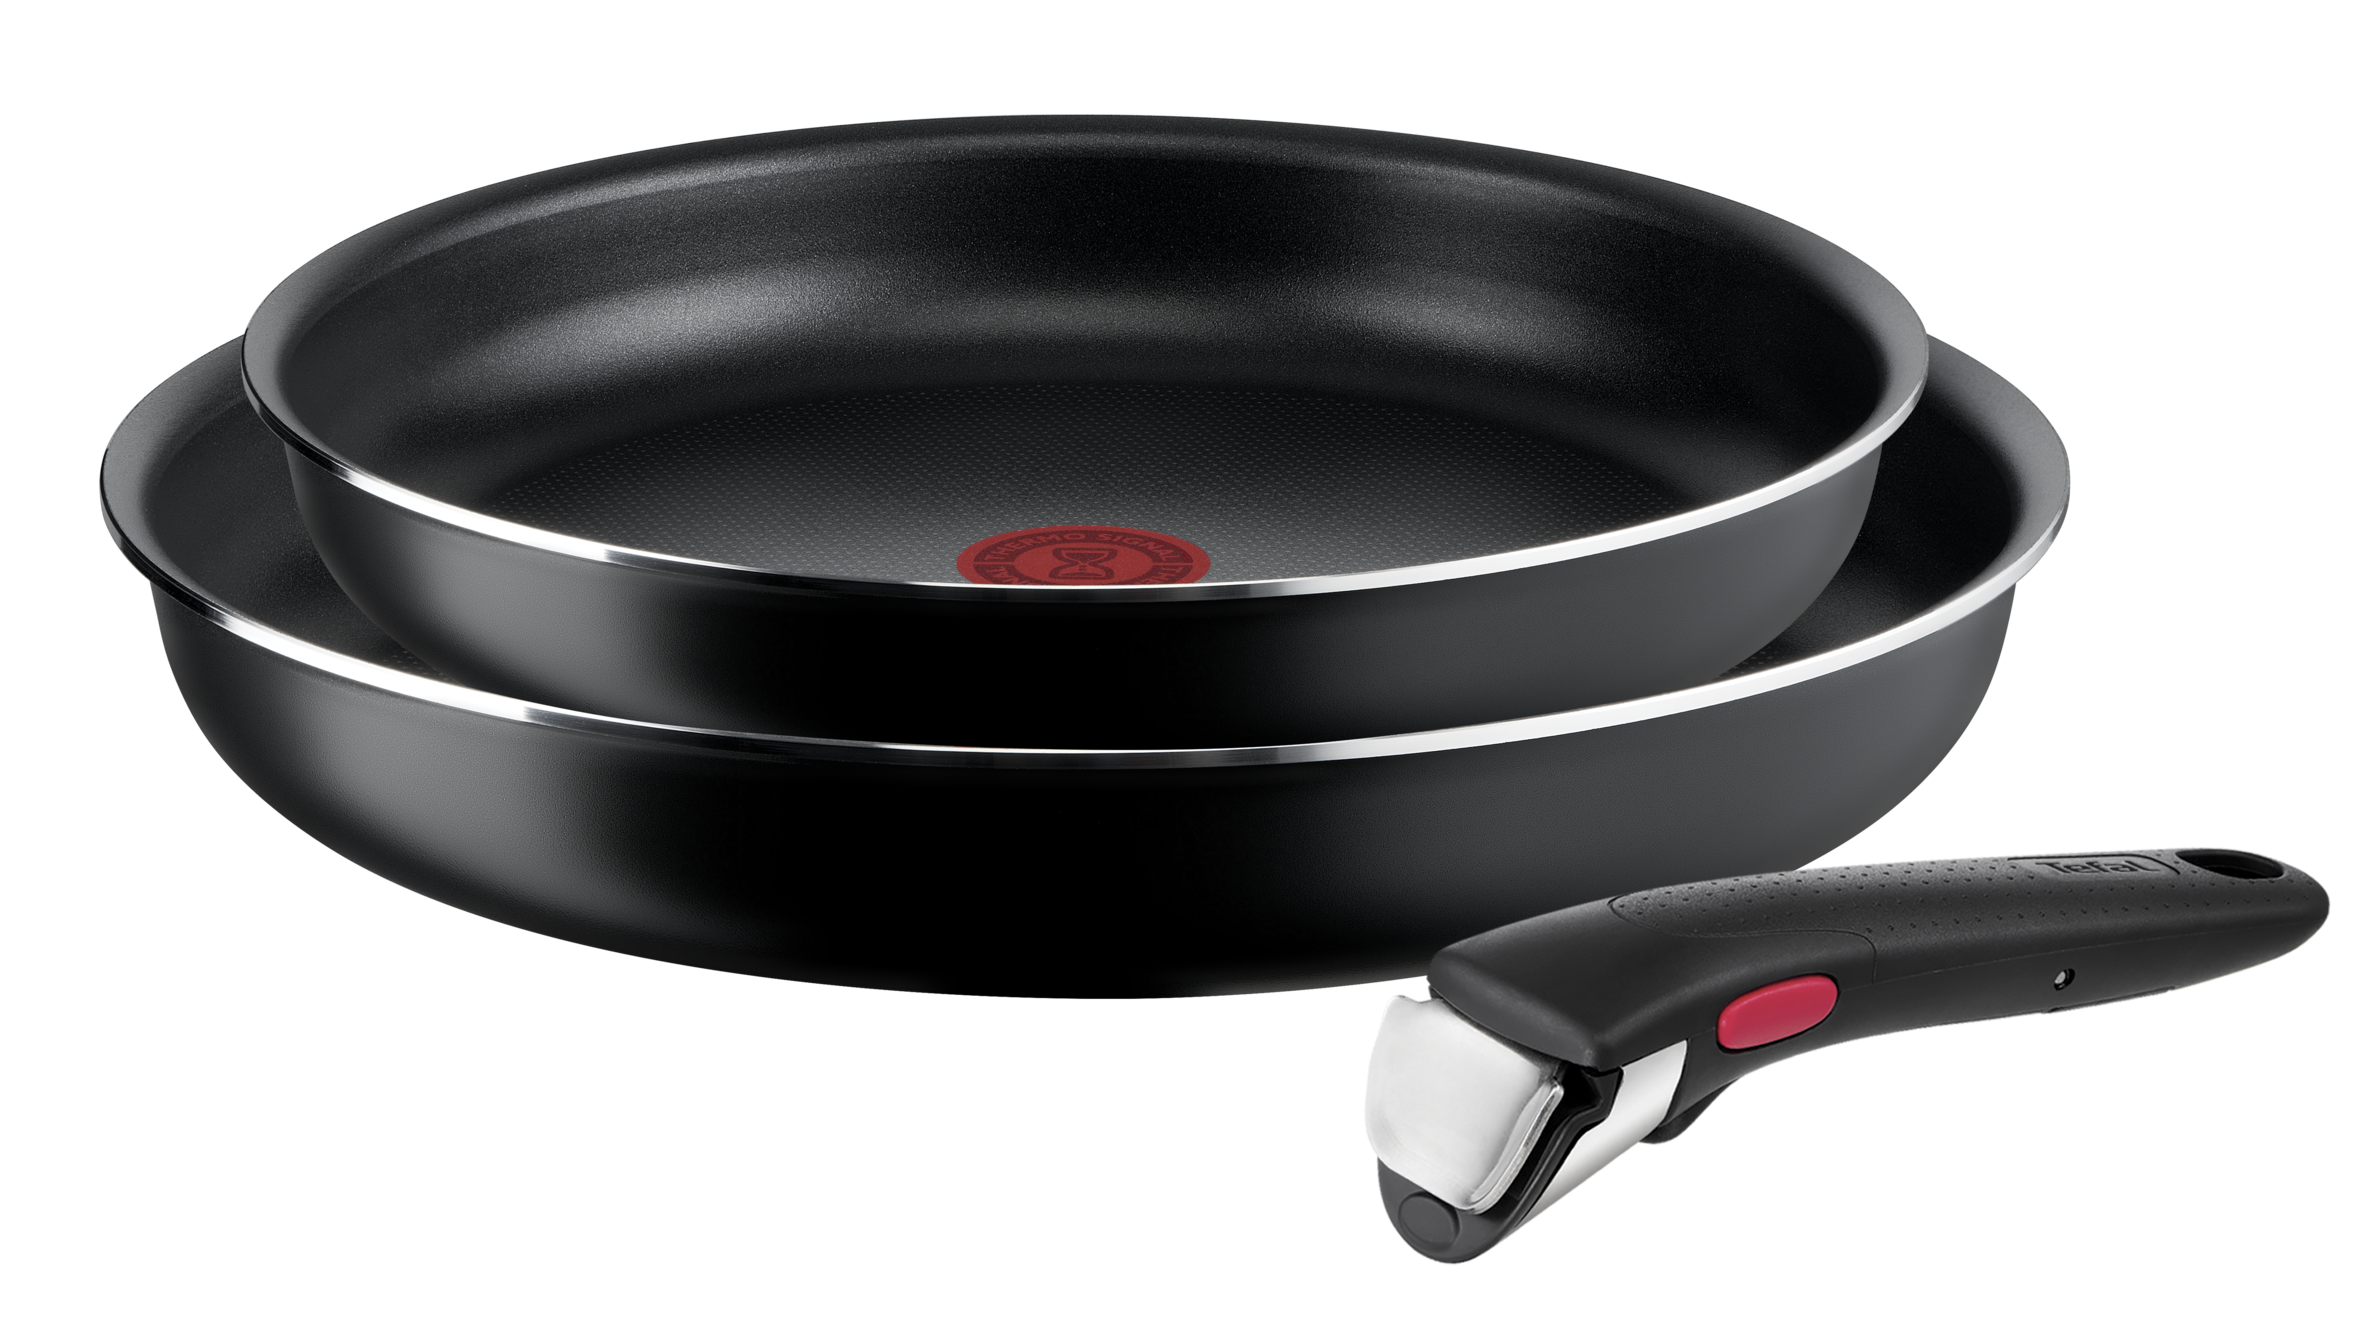 Tefal set to launch Ingenio cookware campaign – Housewares